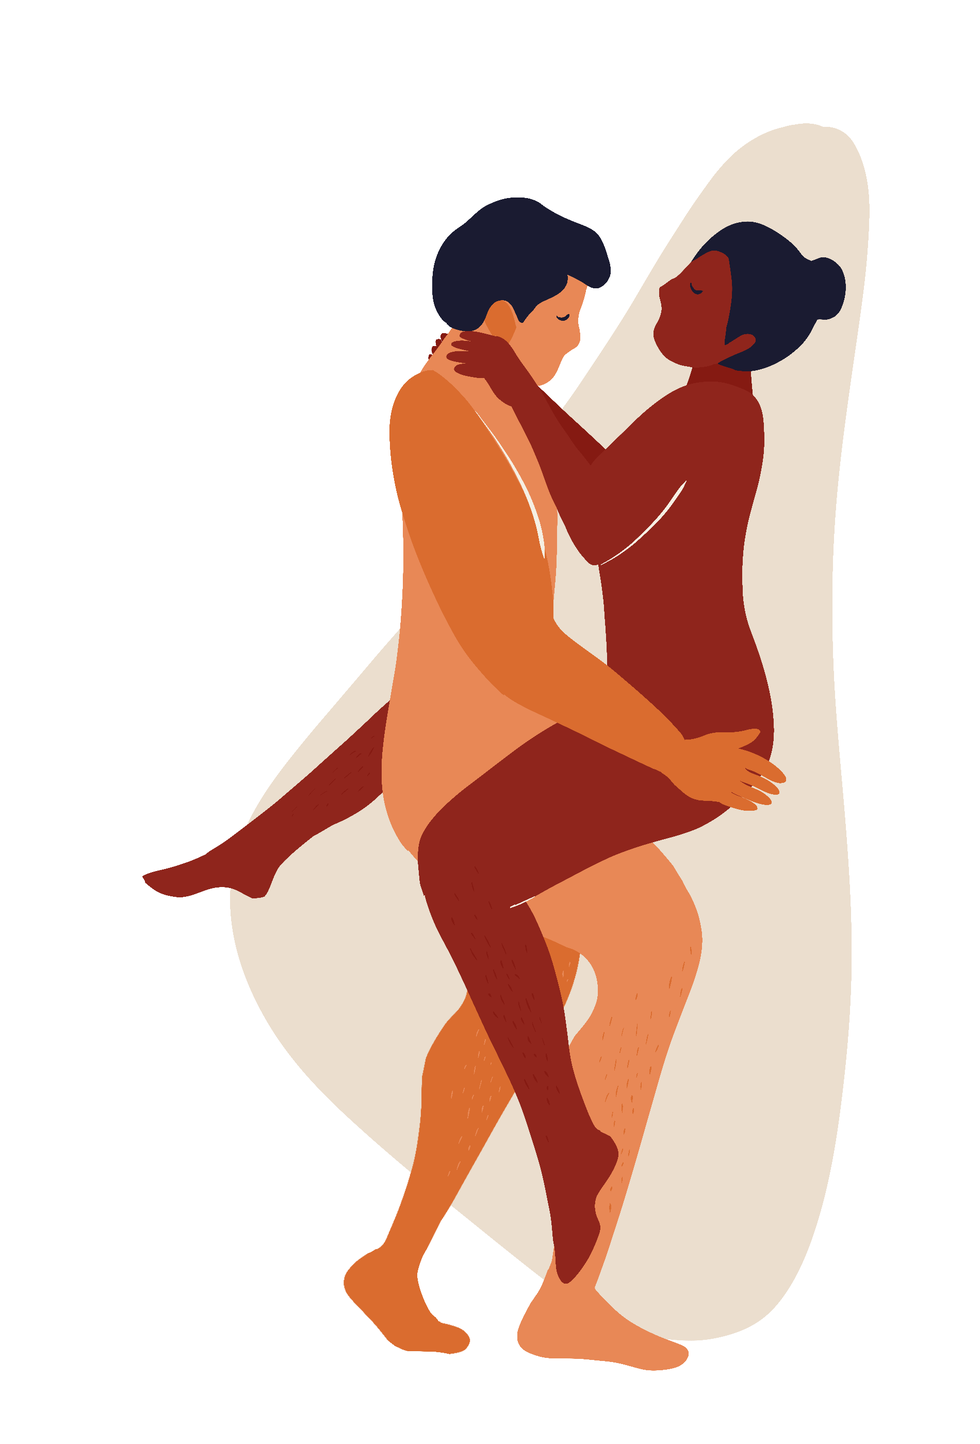 15 Kama Sutra Sex Positions That Couples Can Easily Pull Off